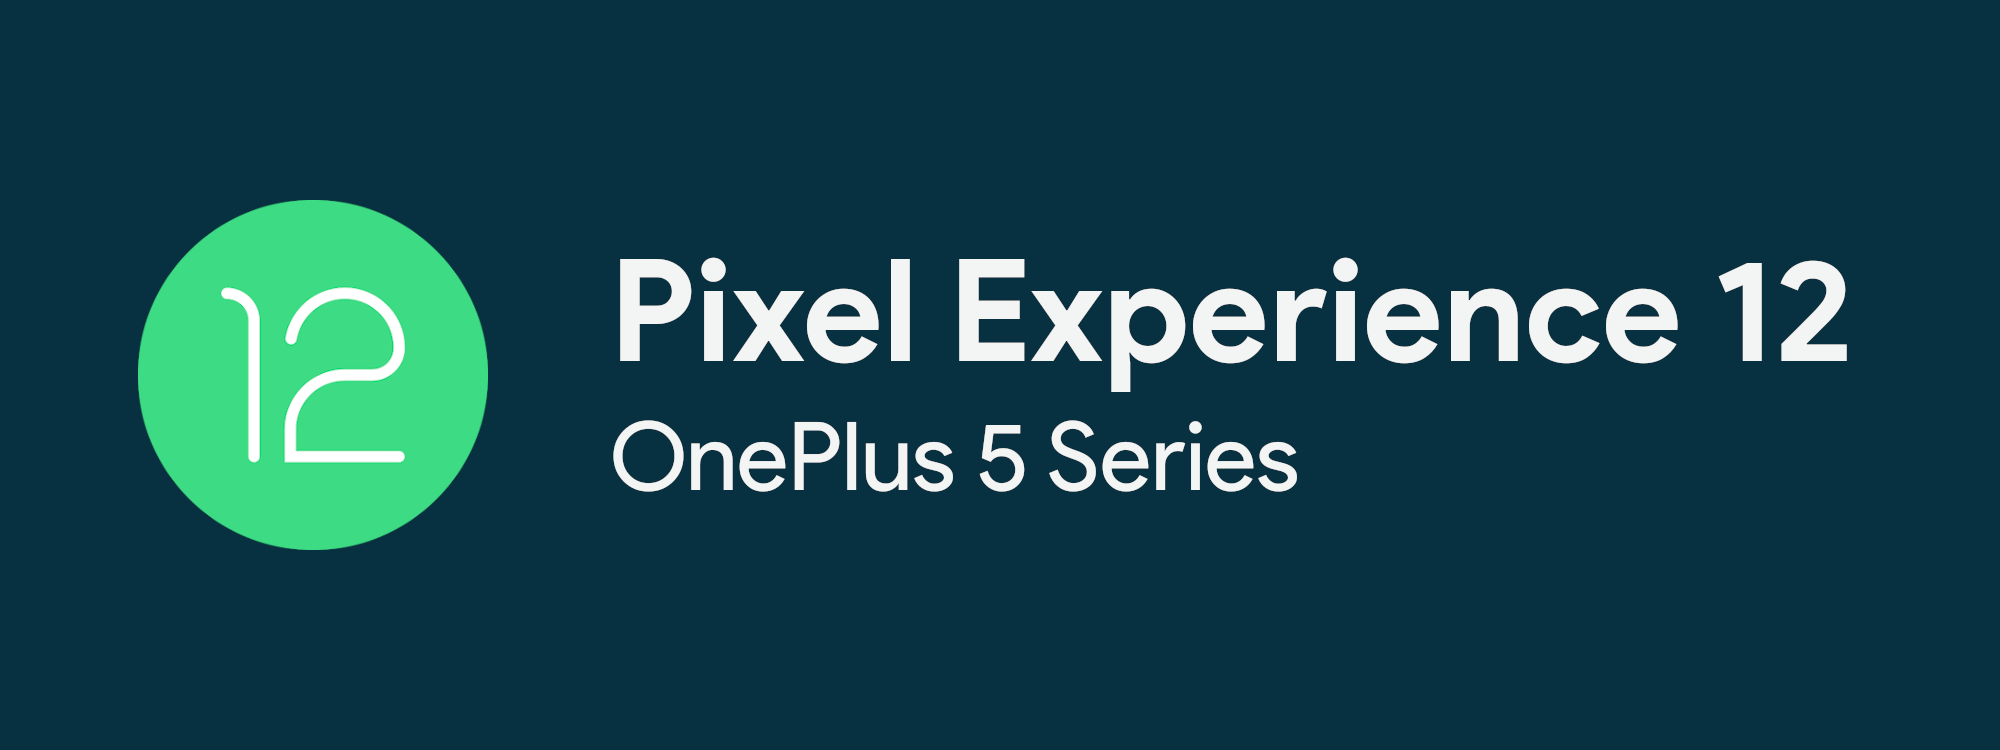 Stable Android 12 for the OnePlus 5 and 5T - Pixel Experience ...